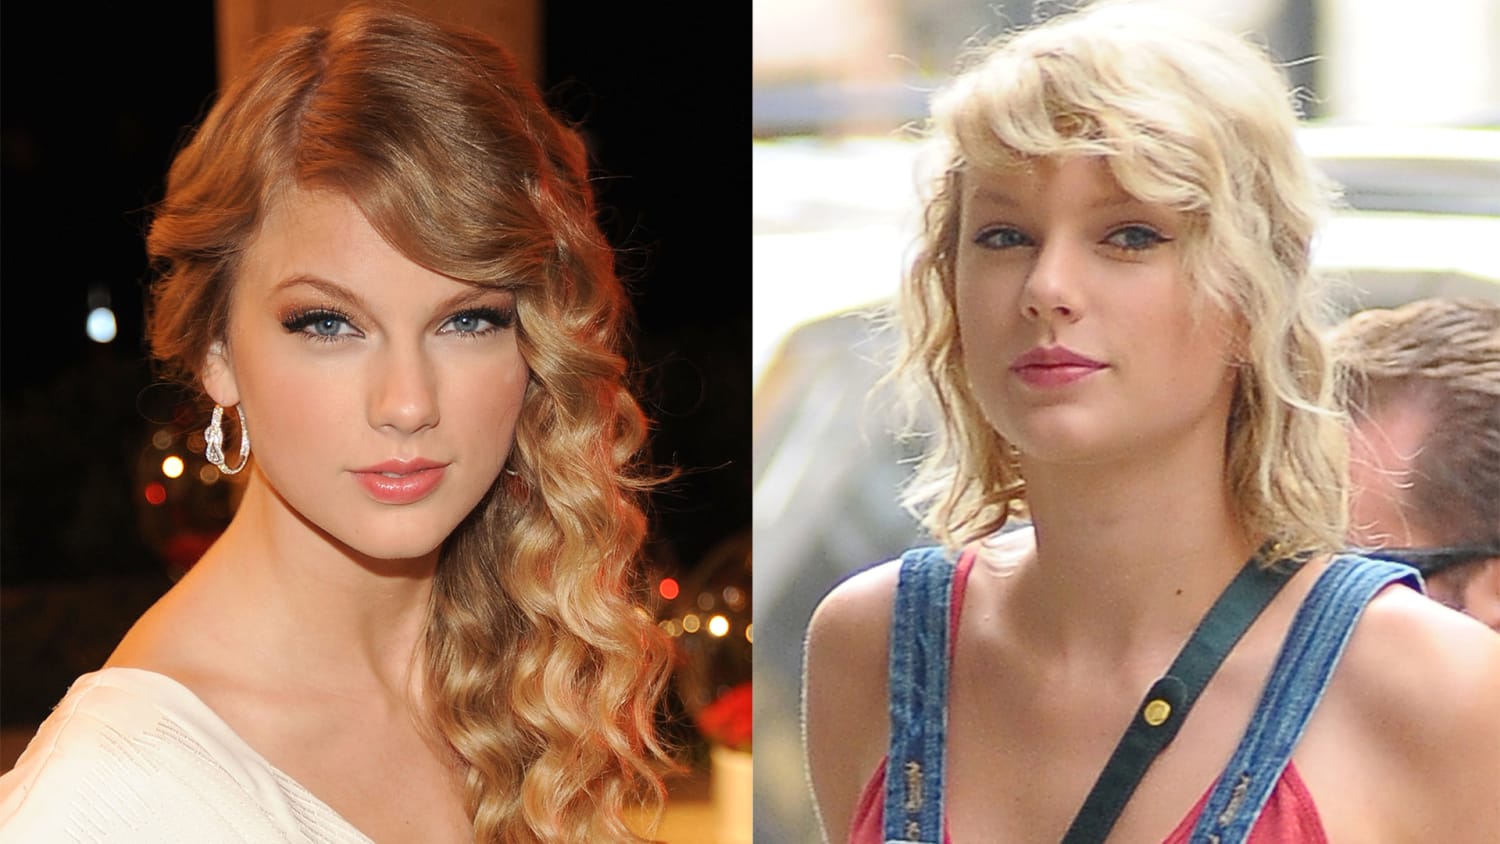 Taylor Swift's hair returns to its curly, country music roots